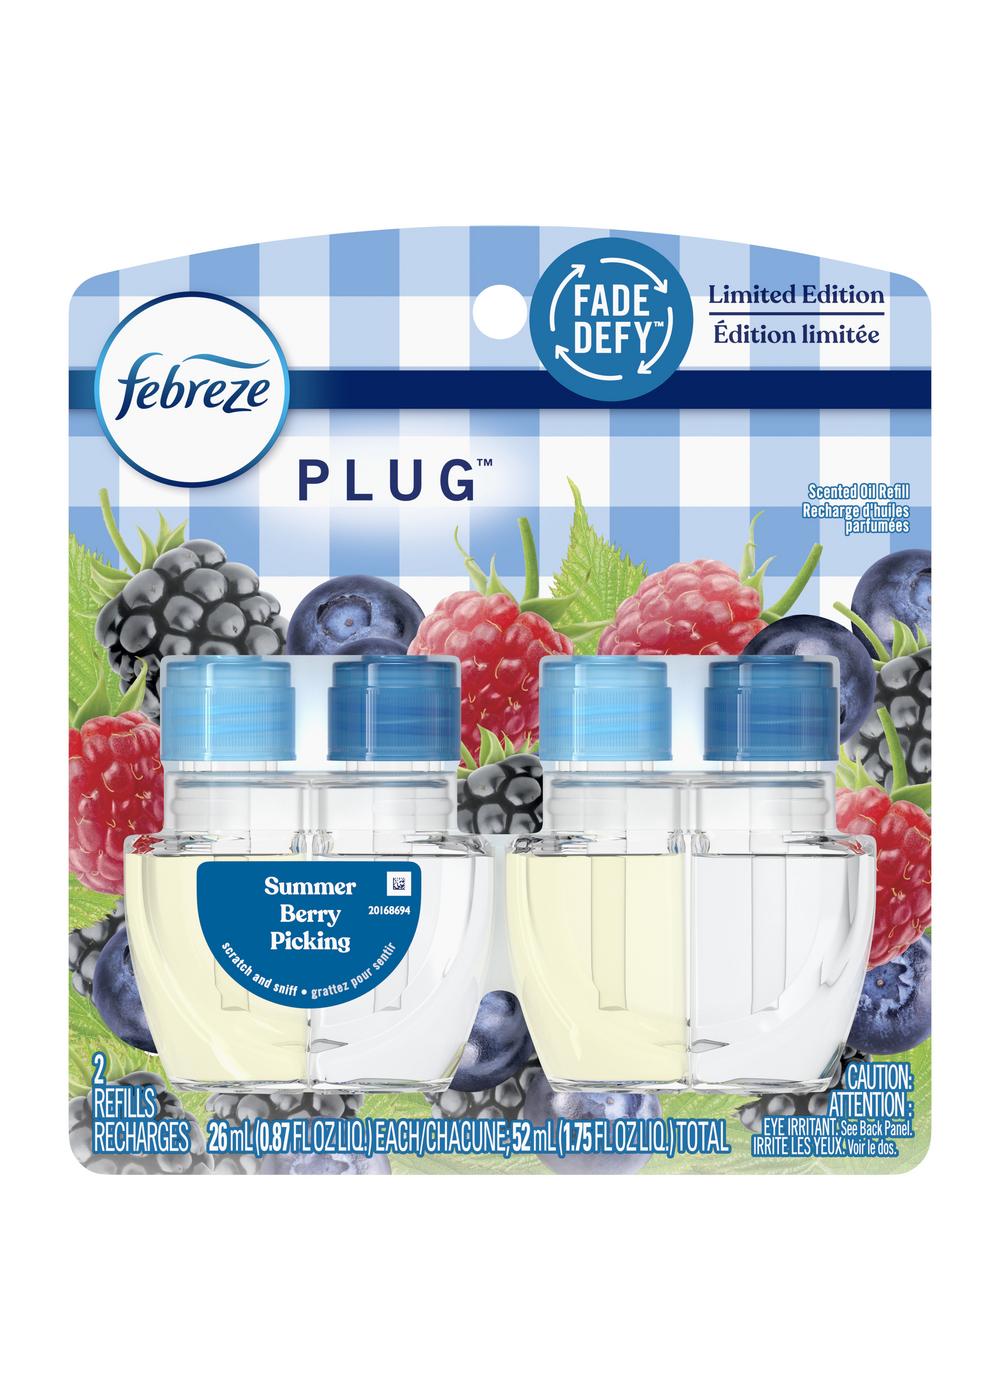 Febreze Plug Scented Oil Refills - Summer Berry Picking; image 1 of 2